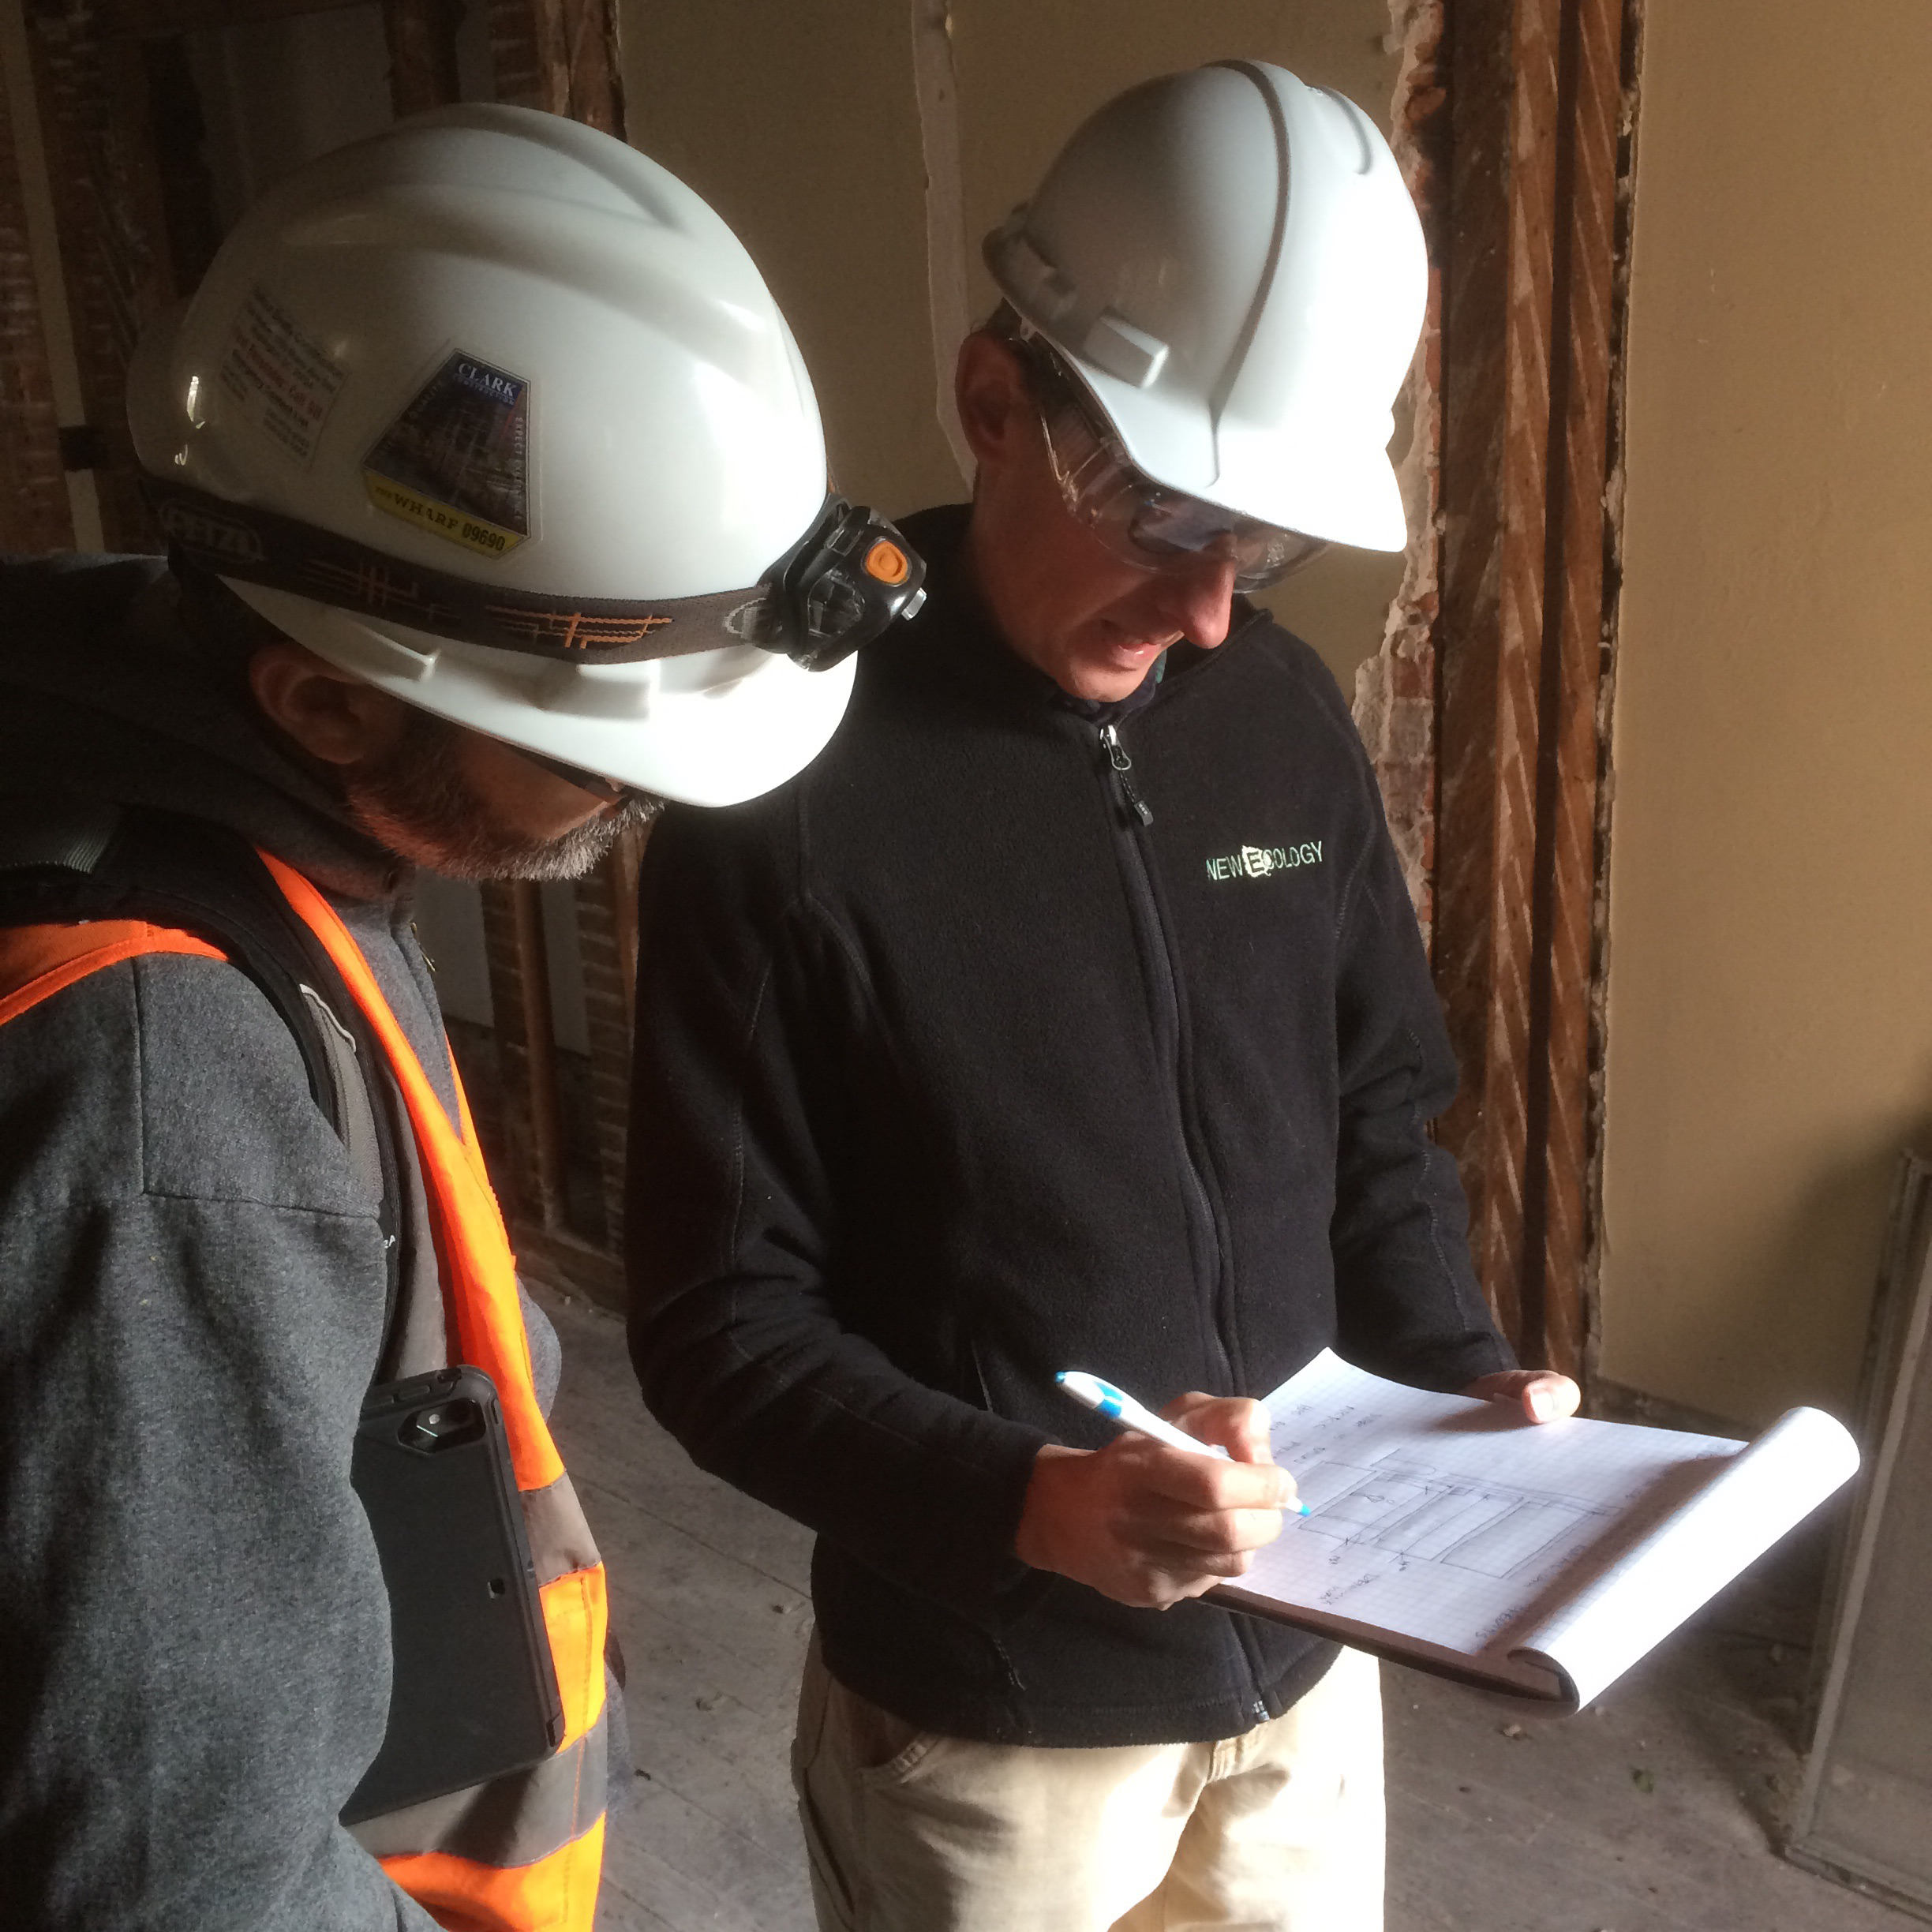 2 men in hard hats reviewing notes